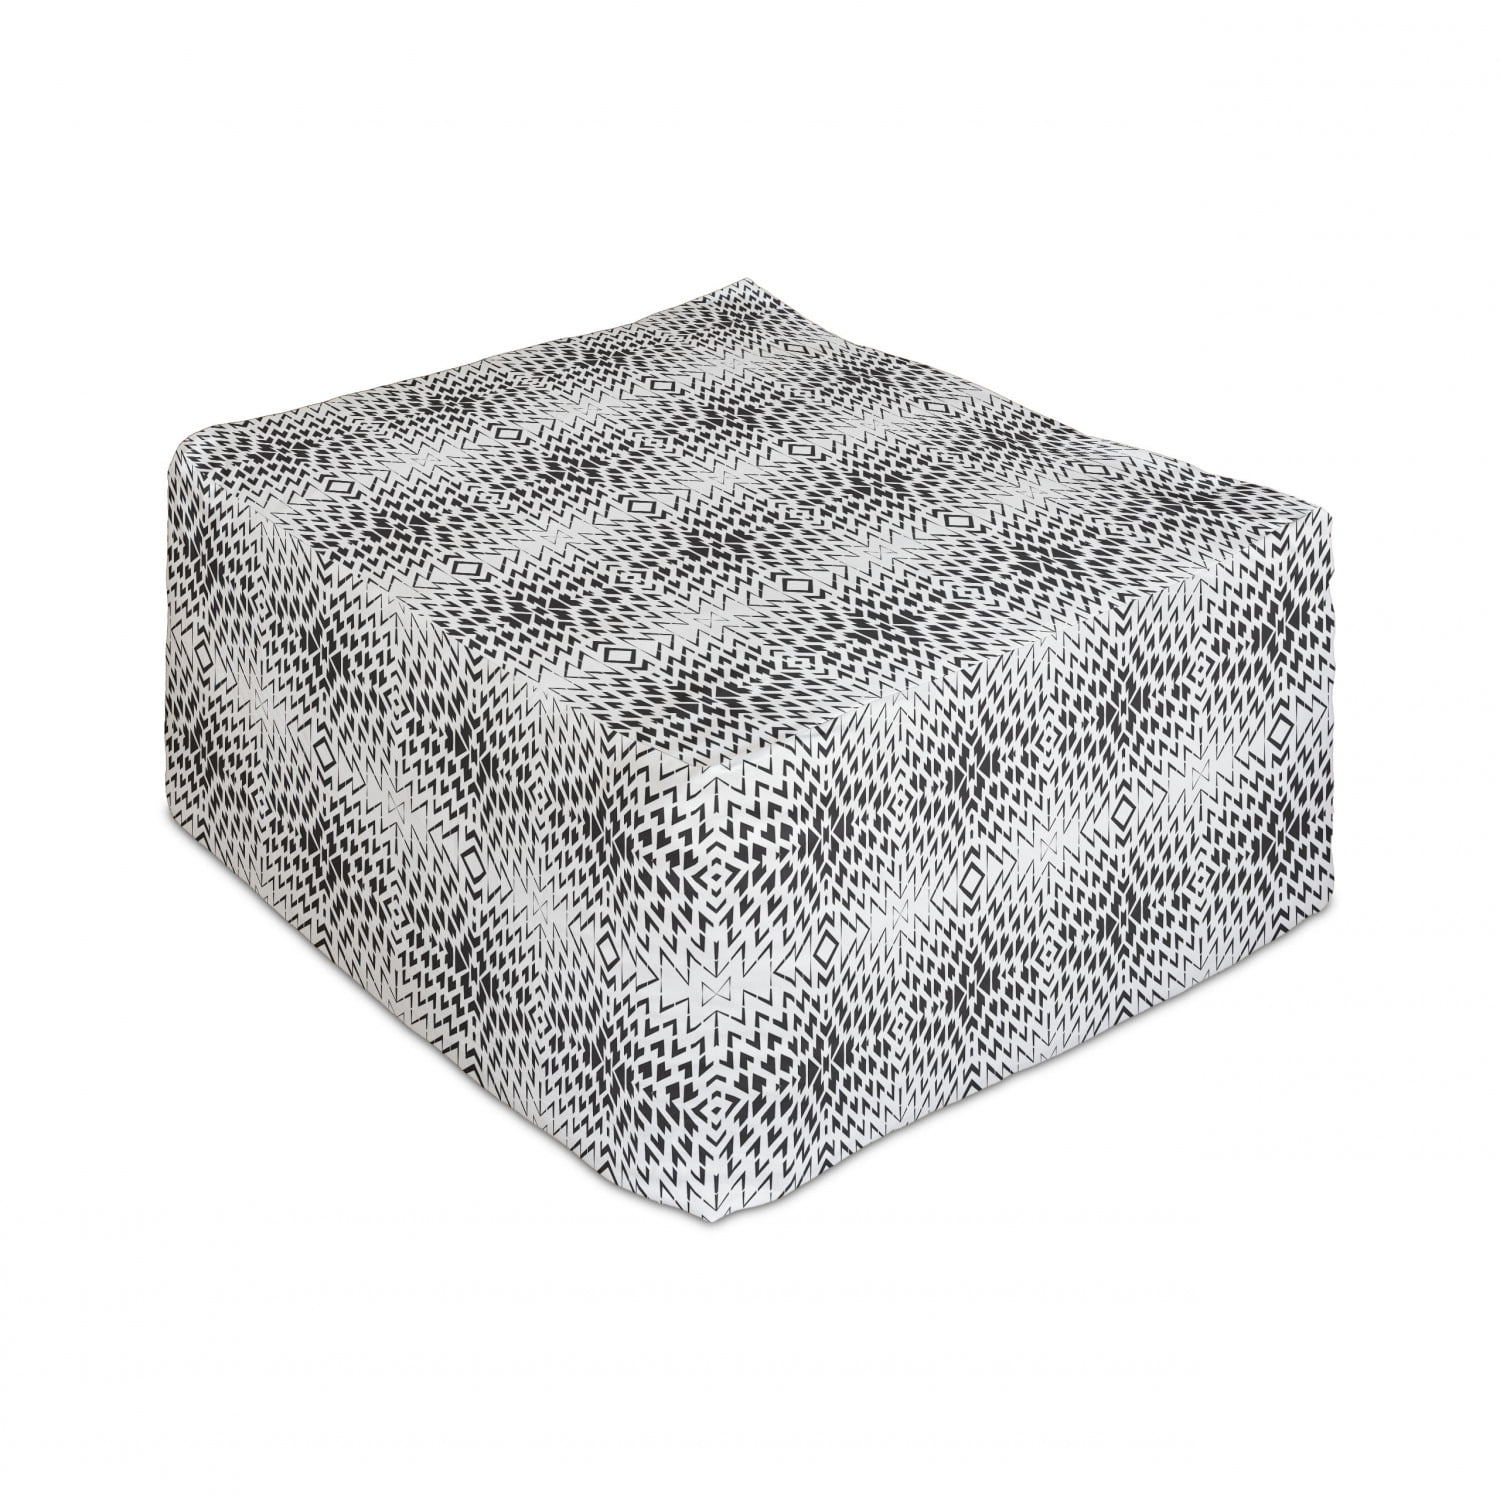 Ambesonne Geometric Rectangle Pouf Retro Style Whimsical Shapes in Different Tones Surreal Abstract Ornaments 25 Multicolor Under Desk Foot Stool for Living Room Office Ottoman with Cover